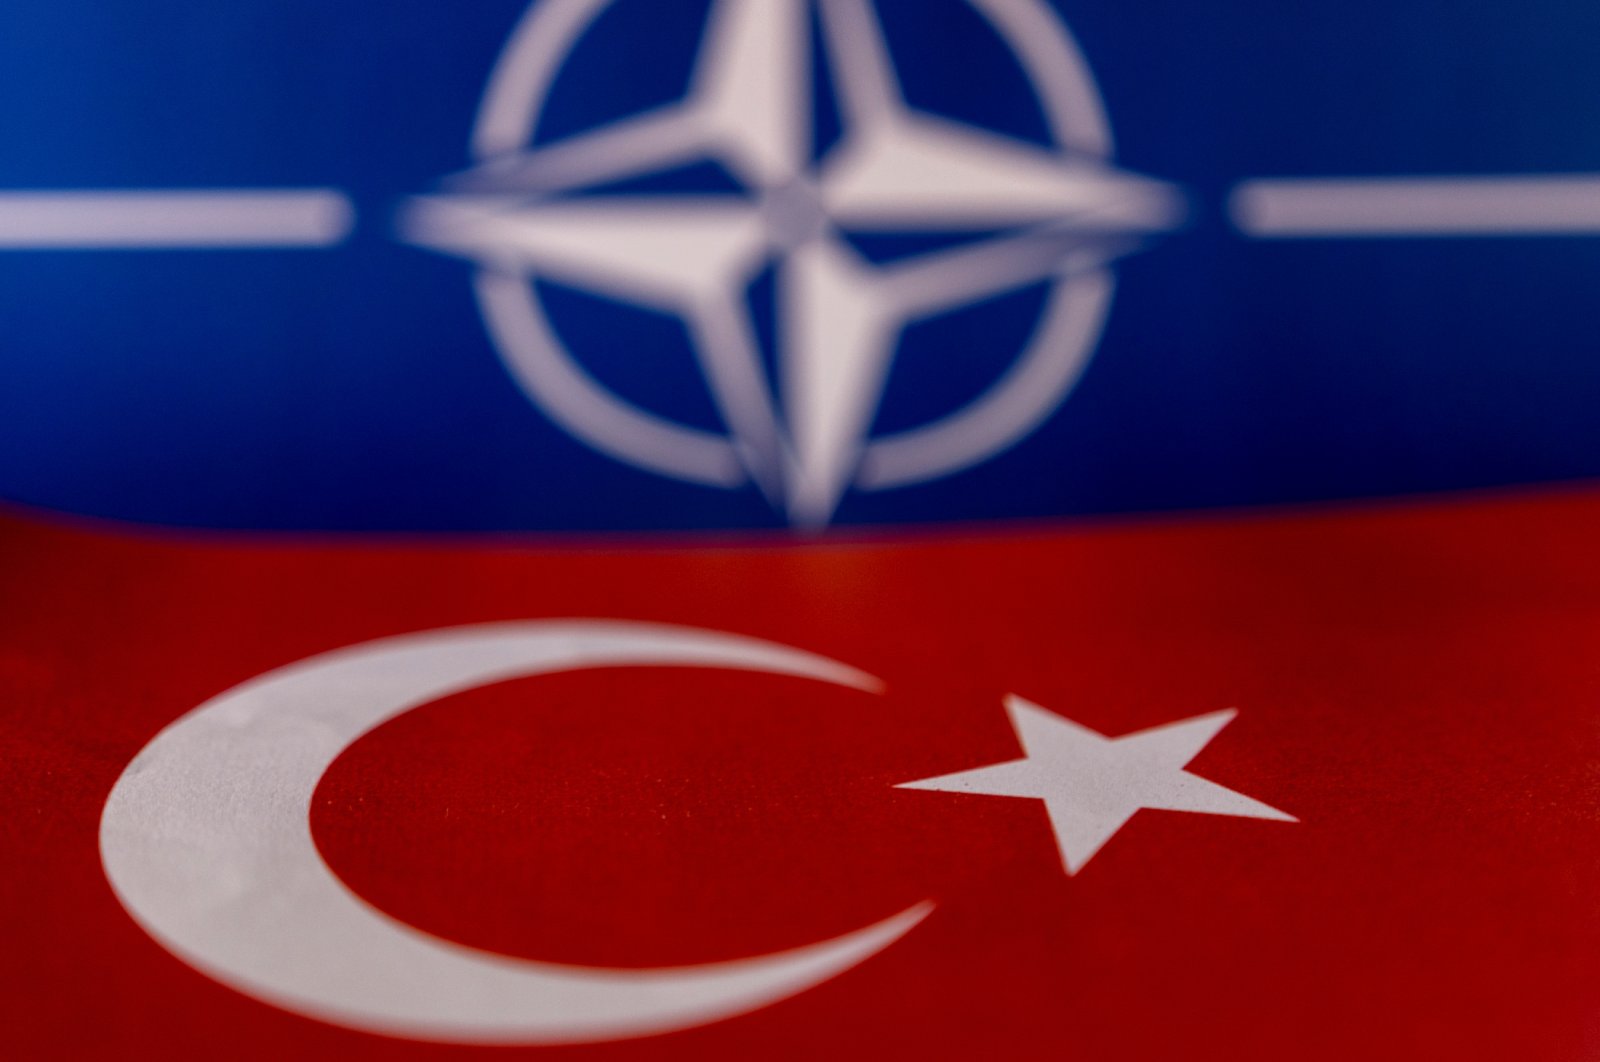 NATO and Turkish flags are seen in this illustration taken on May 18, 2022. (Reuters Photo)